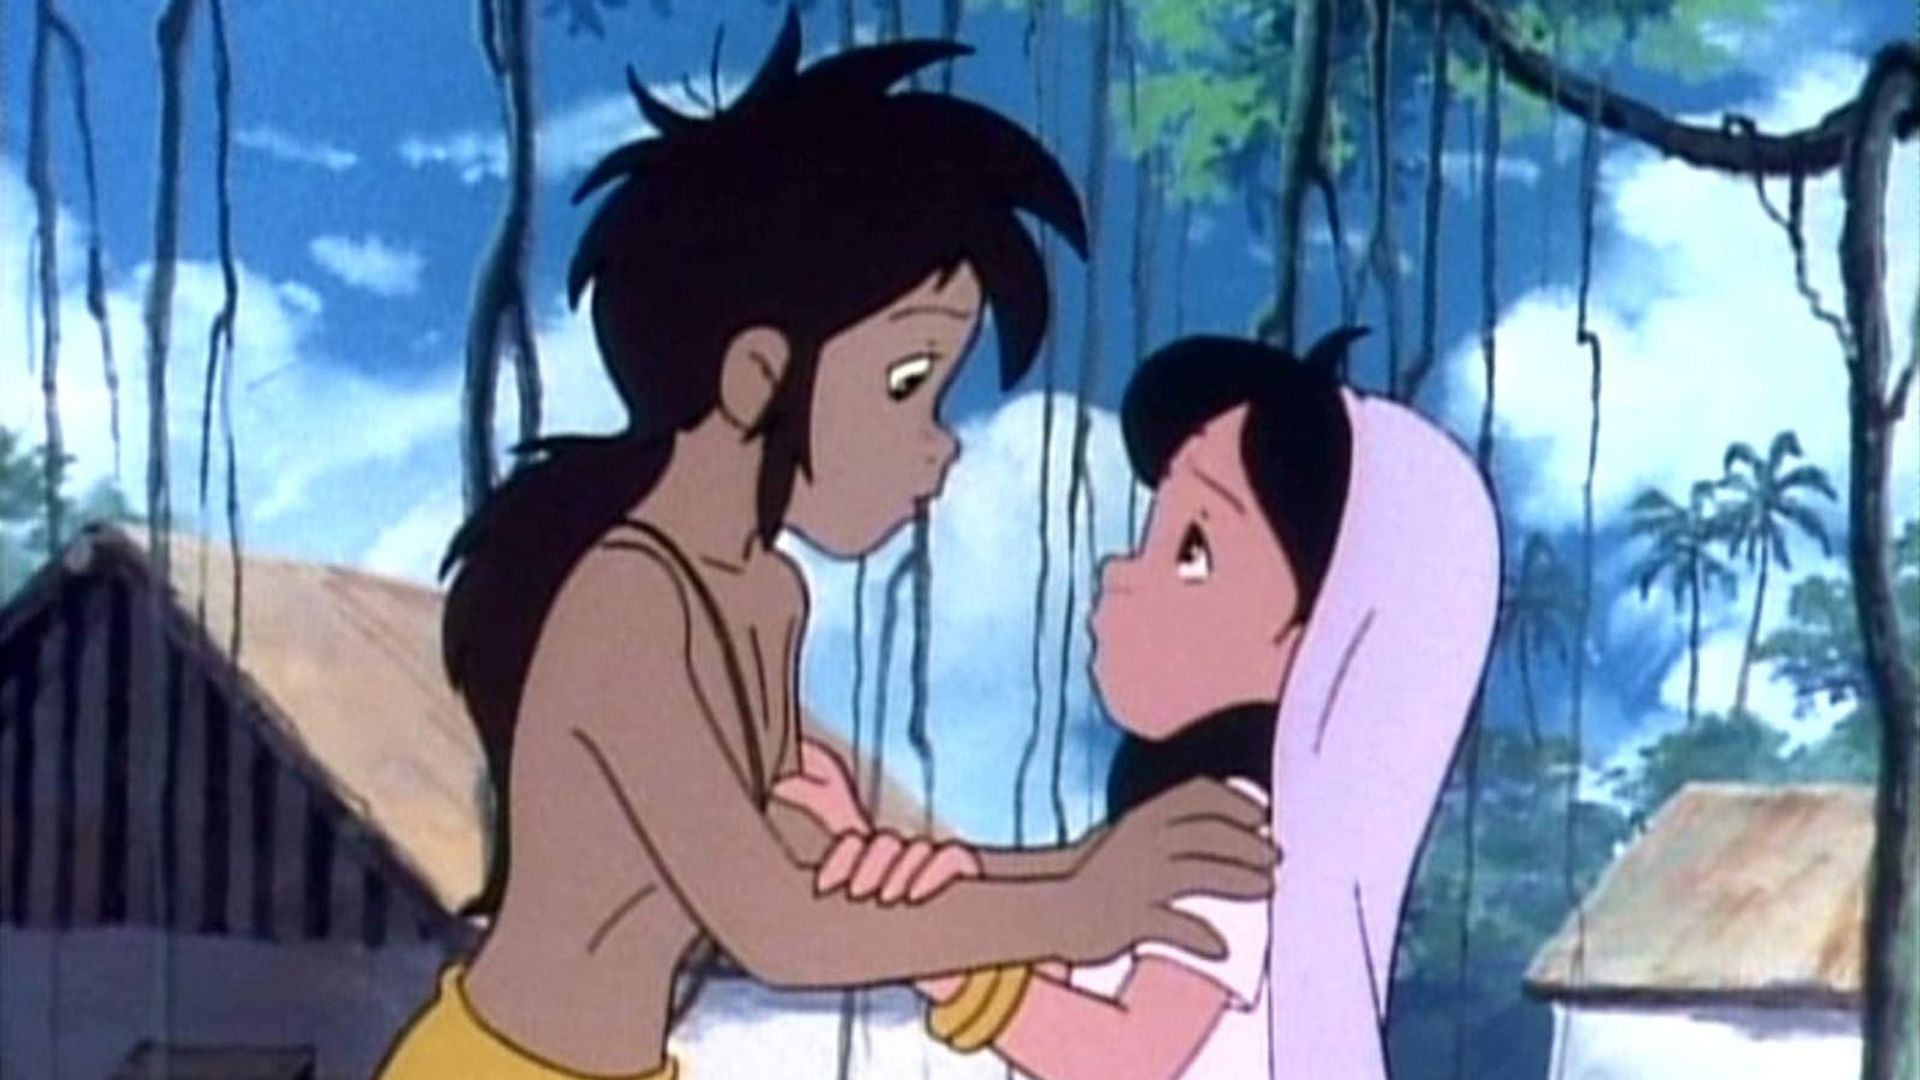 The Jungle Book: The Adventures of Mowgli background